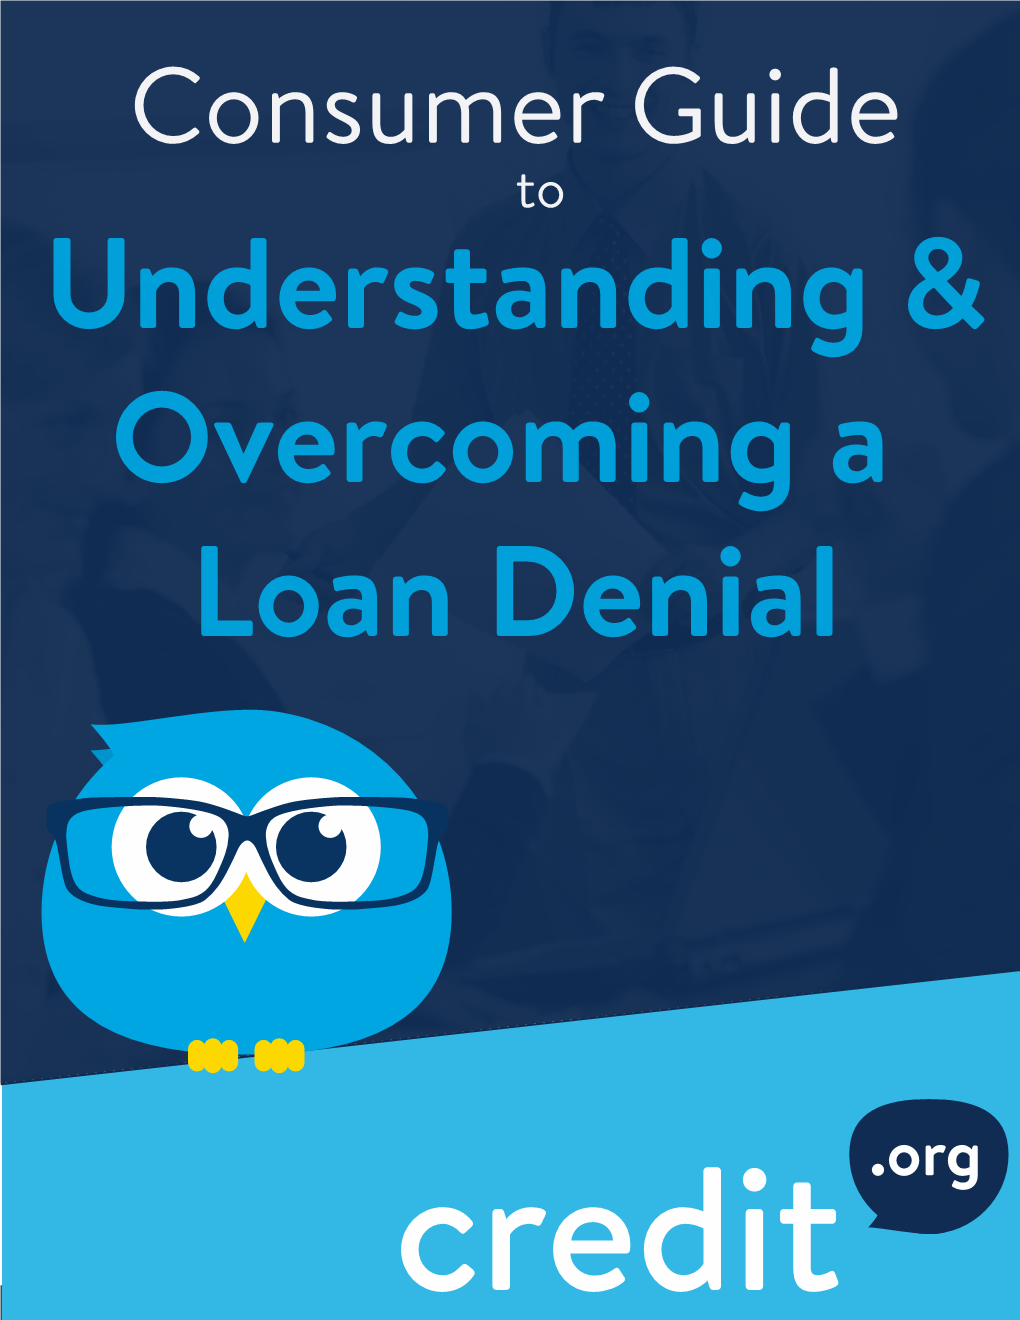 Consumer Guide to Understanding & Overcoming a Loan Denial